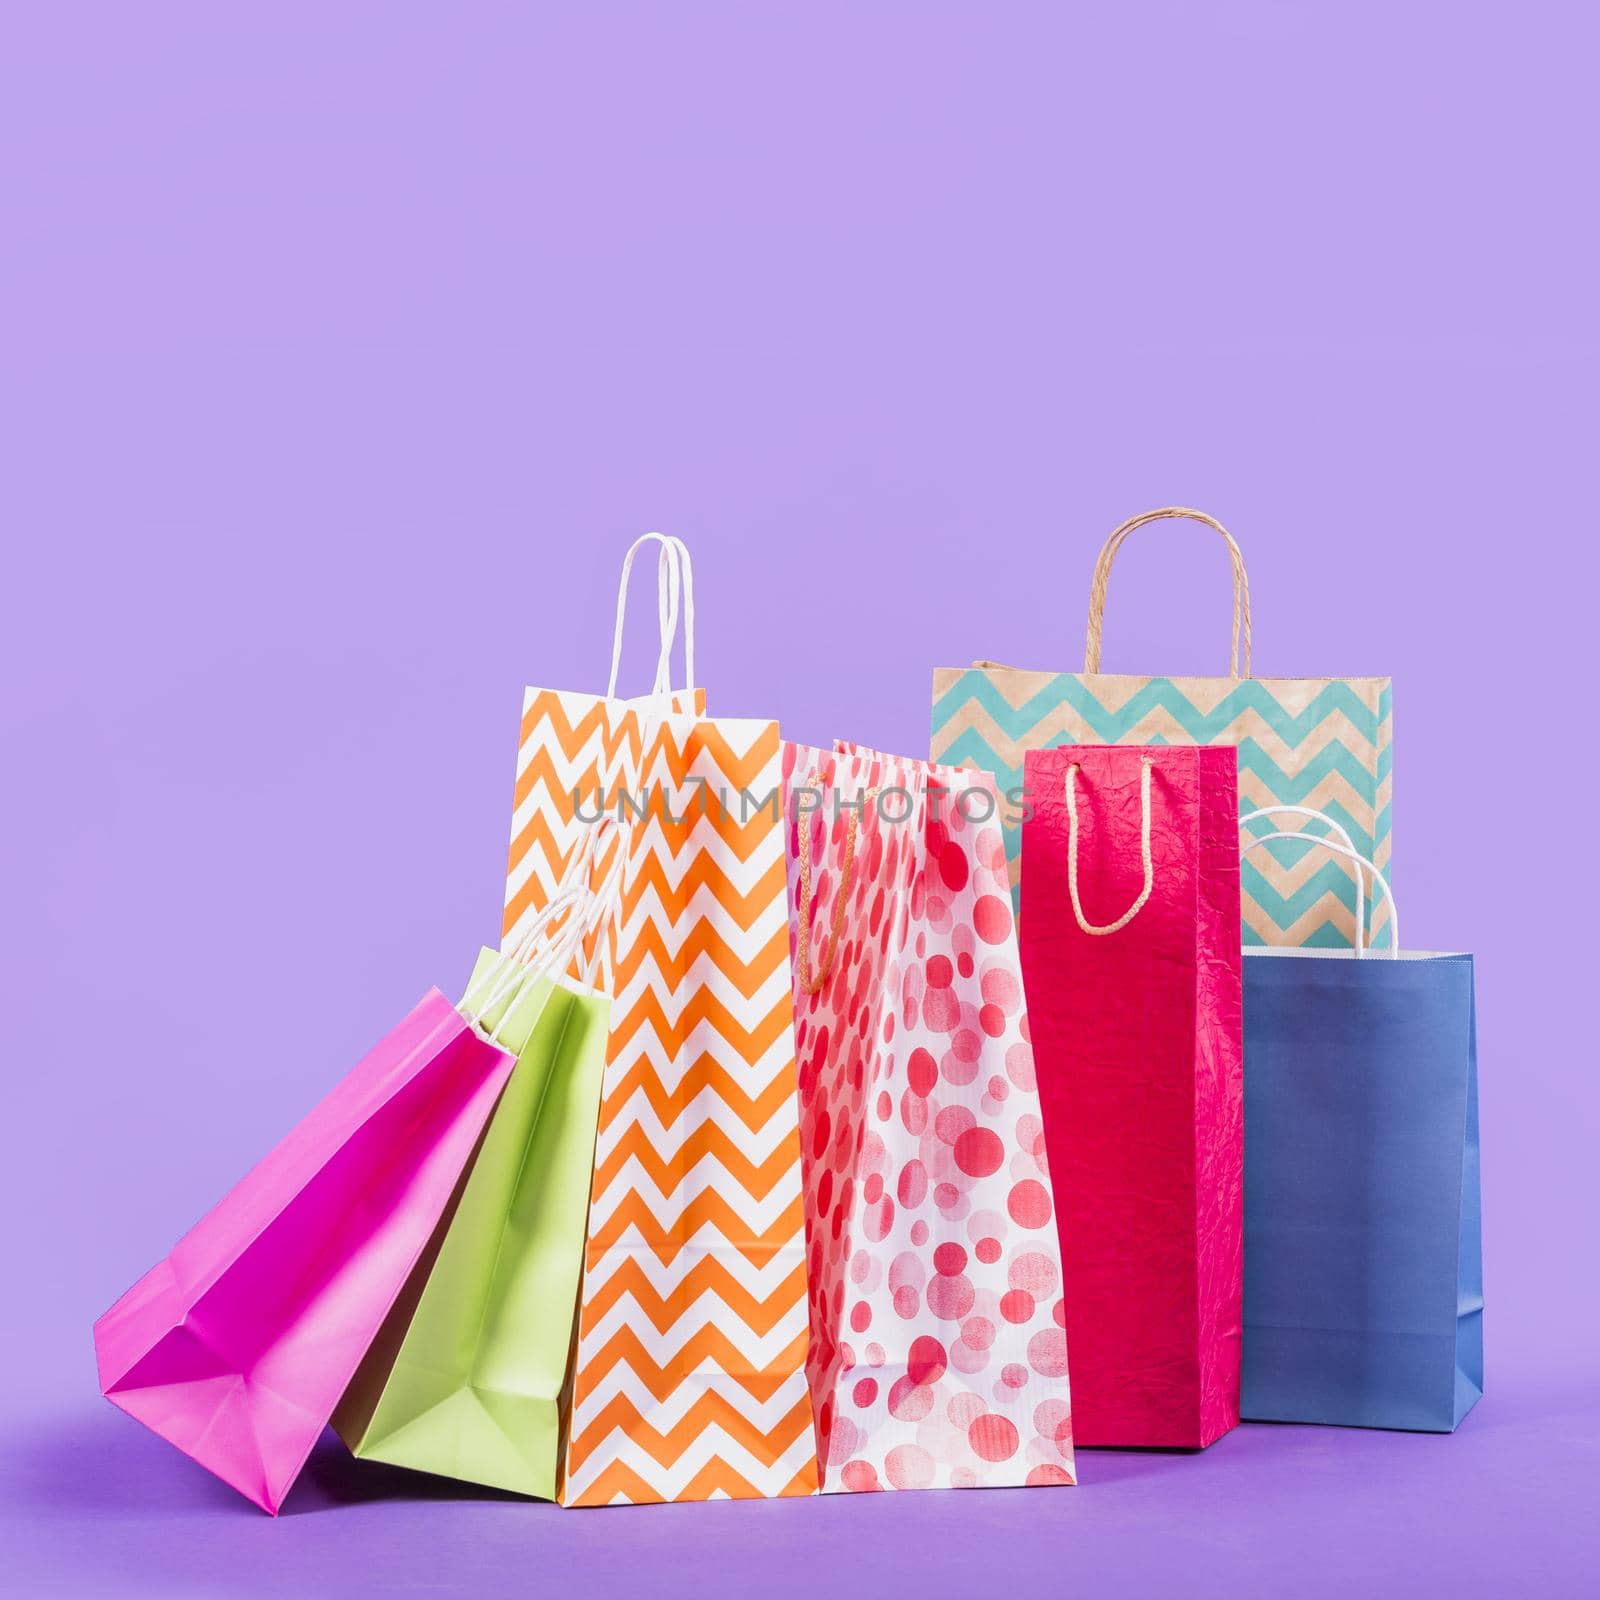 colorful empty shopping bags purple background. High quality beautiful photo concept by Zahard